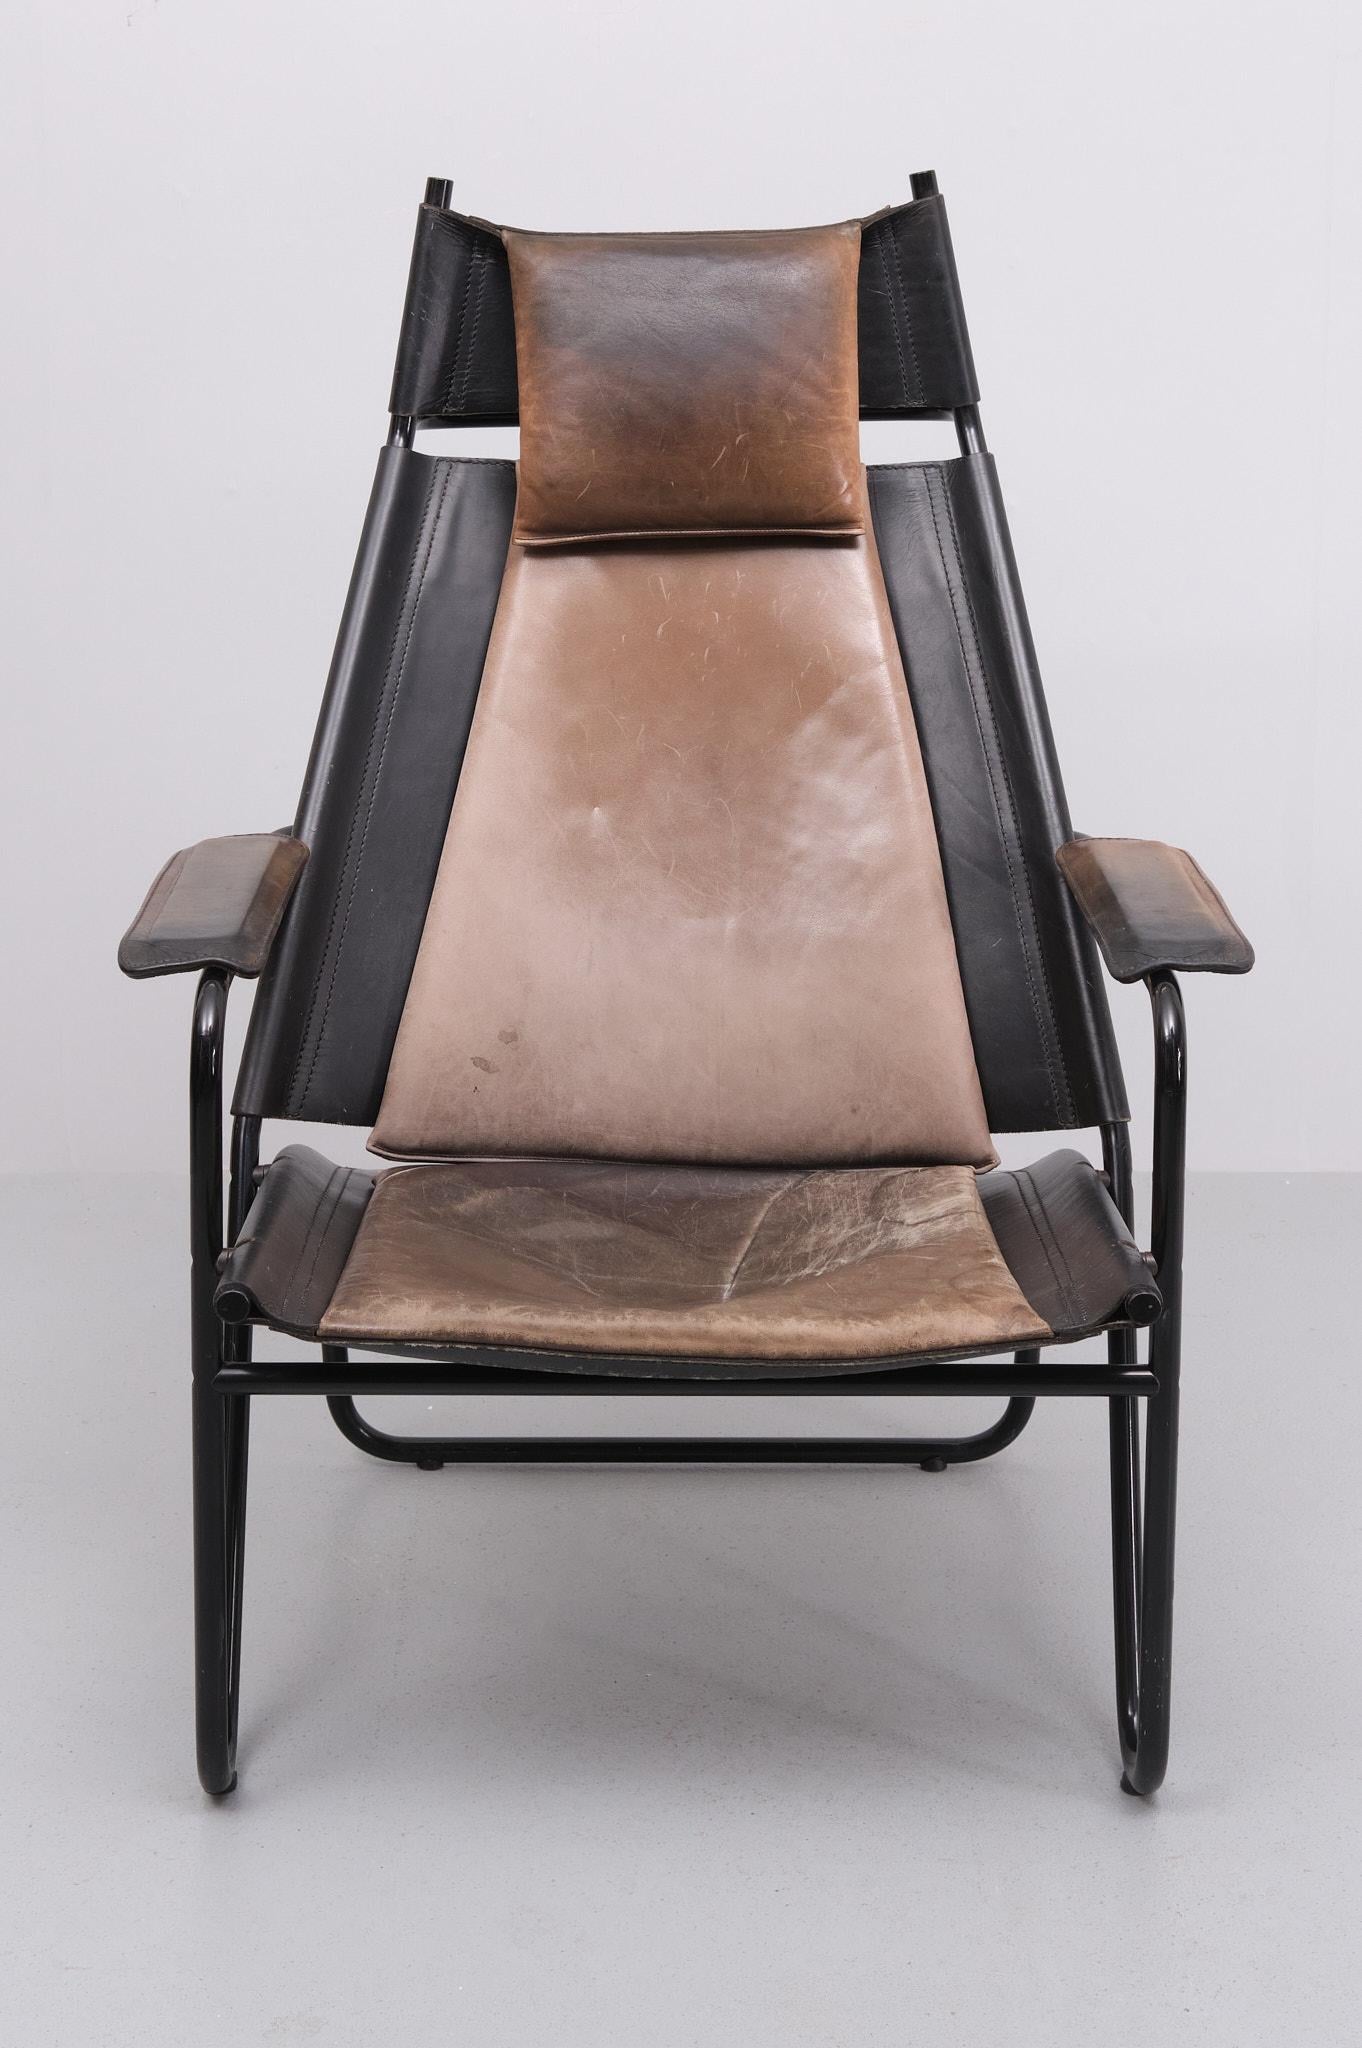 Beautiful lounge chair . love the design . Black tube frame
comes with a thick Black leather upholstery .over that a Camel color
Leather cushions . Superb patine .attributed to Lina Bo Bardi 

